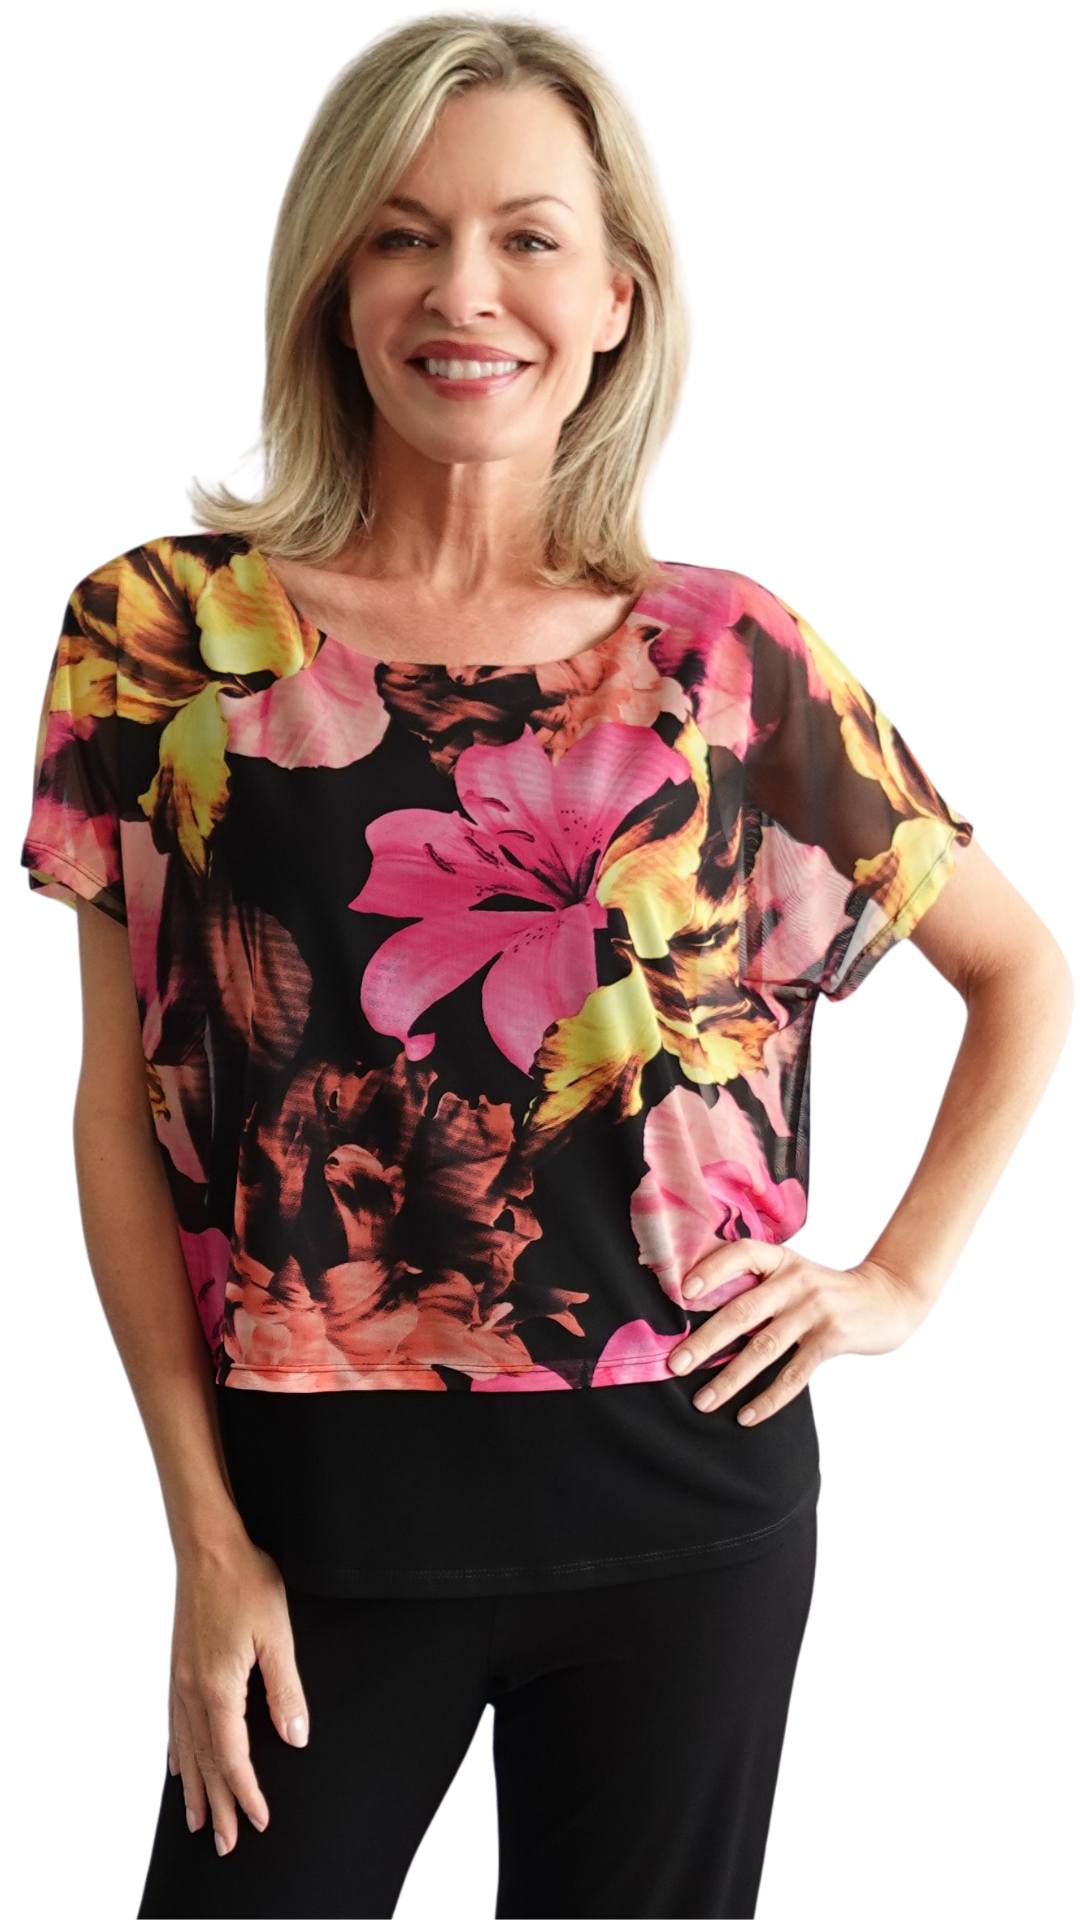 Bloom Print Sheer Layered Top. Style SW92321